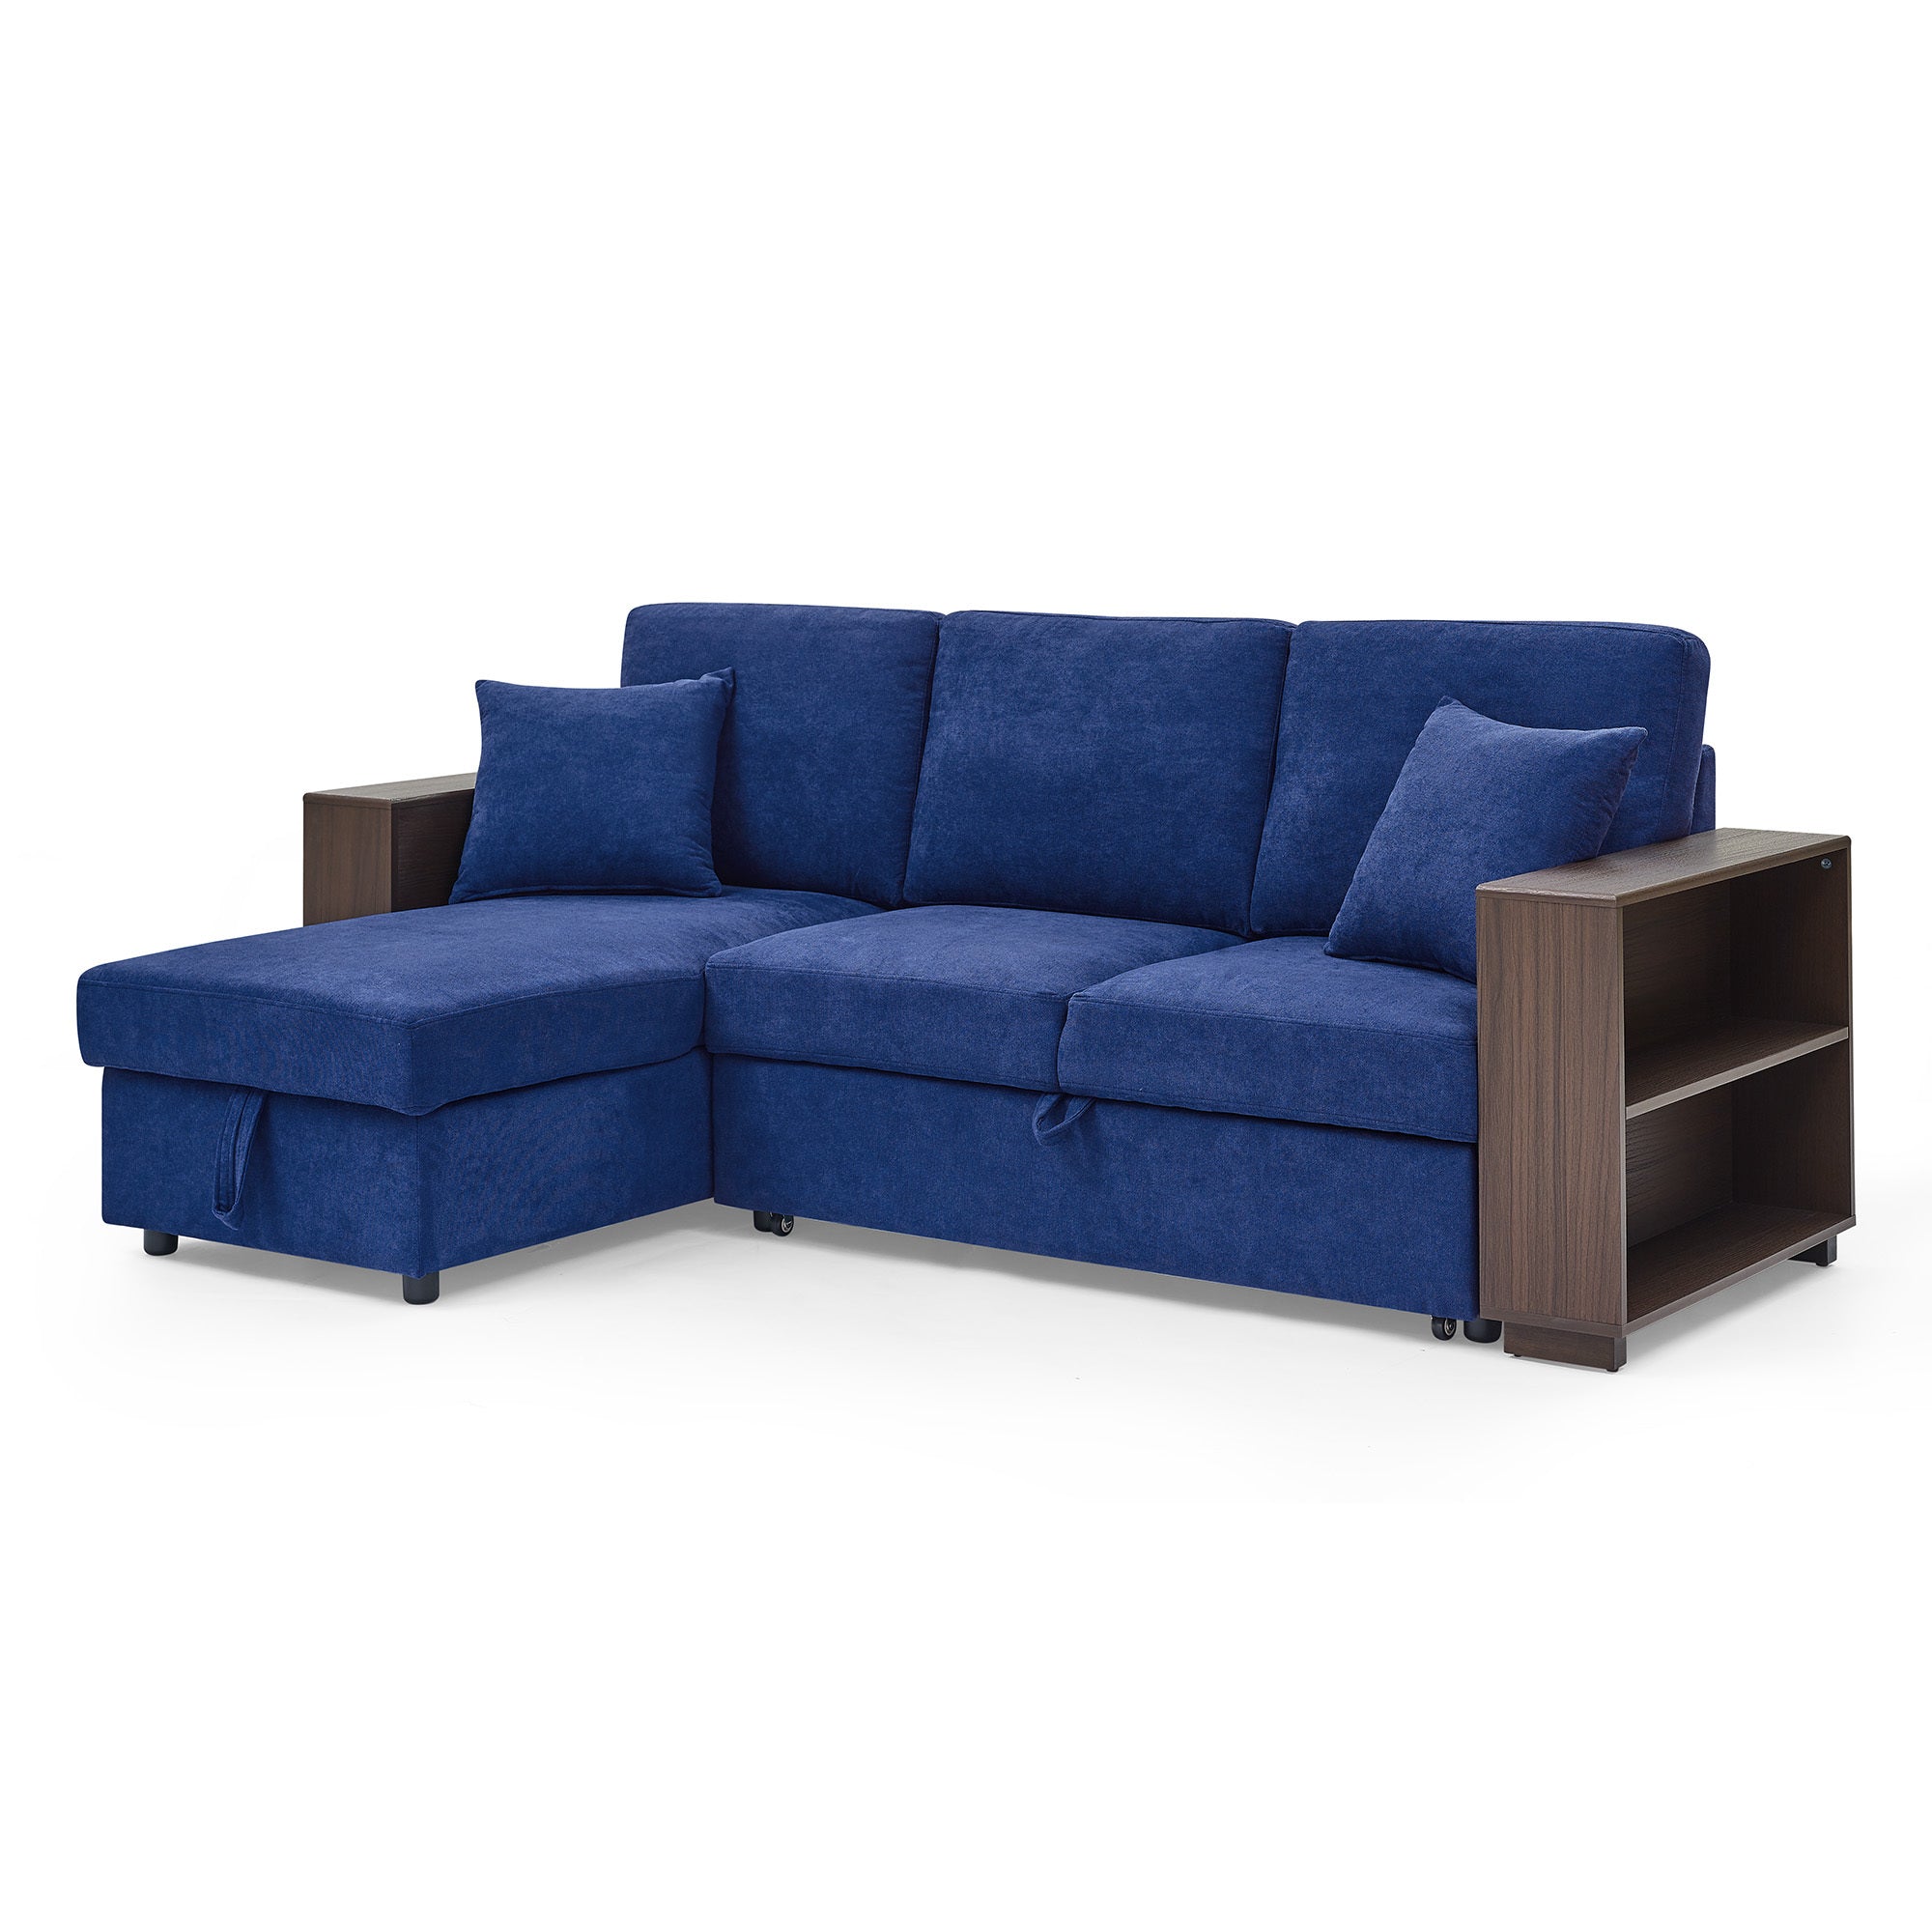 MAICOSY 88" Sleeper Sofa and Reversible Chaise Storage & Two Pillows, Navy Blue